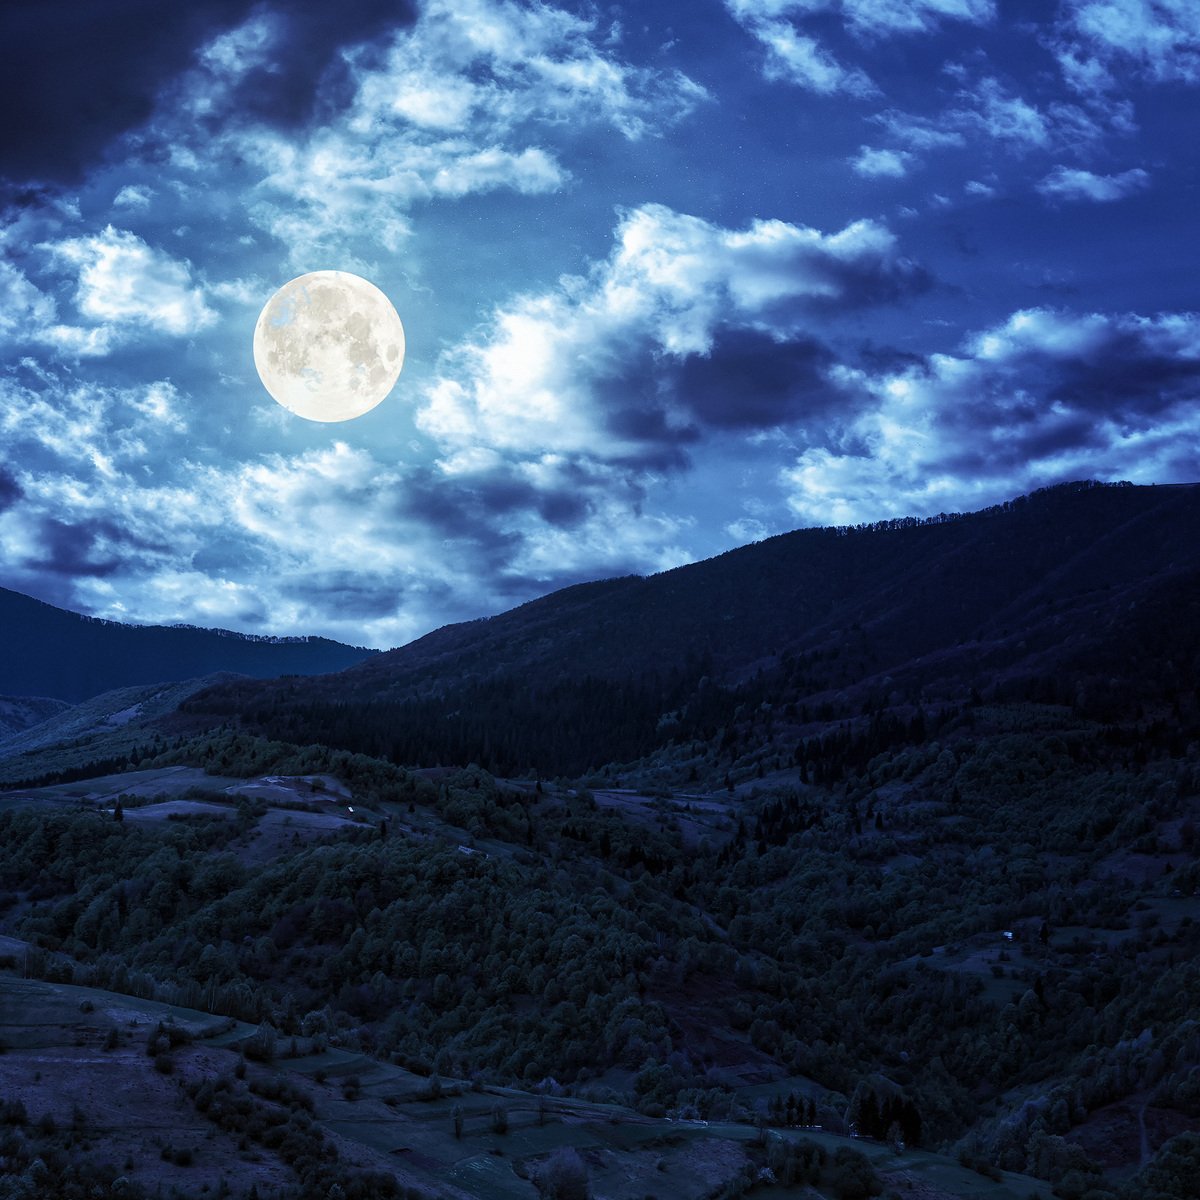 a view of a moon lit mountain with clouds in the background